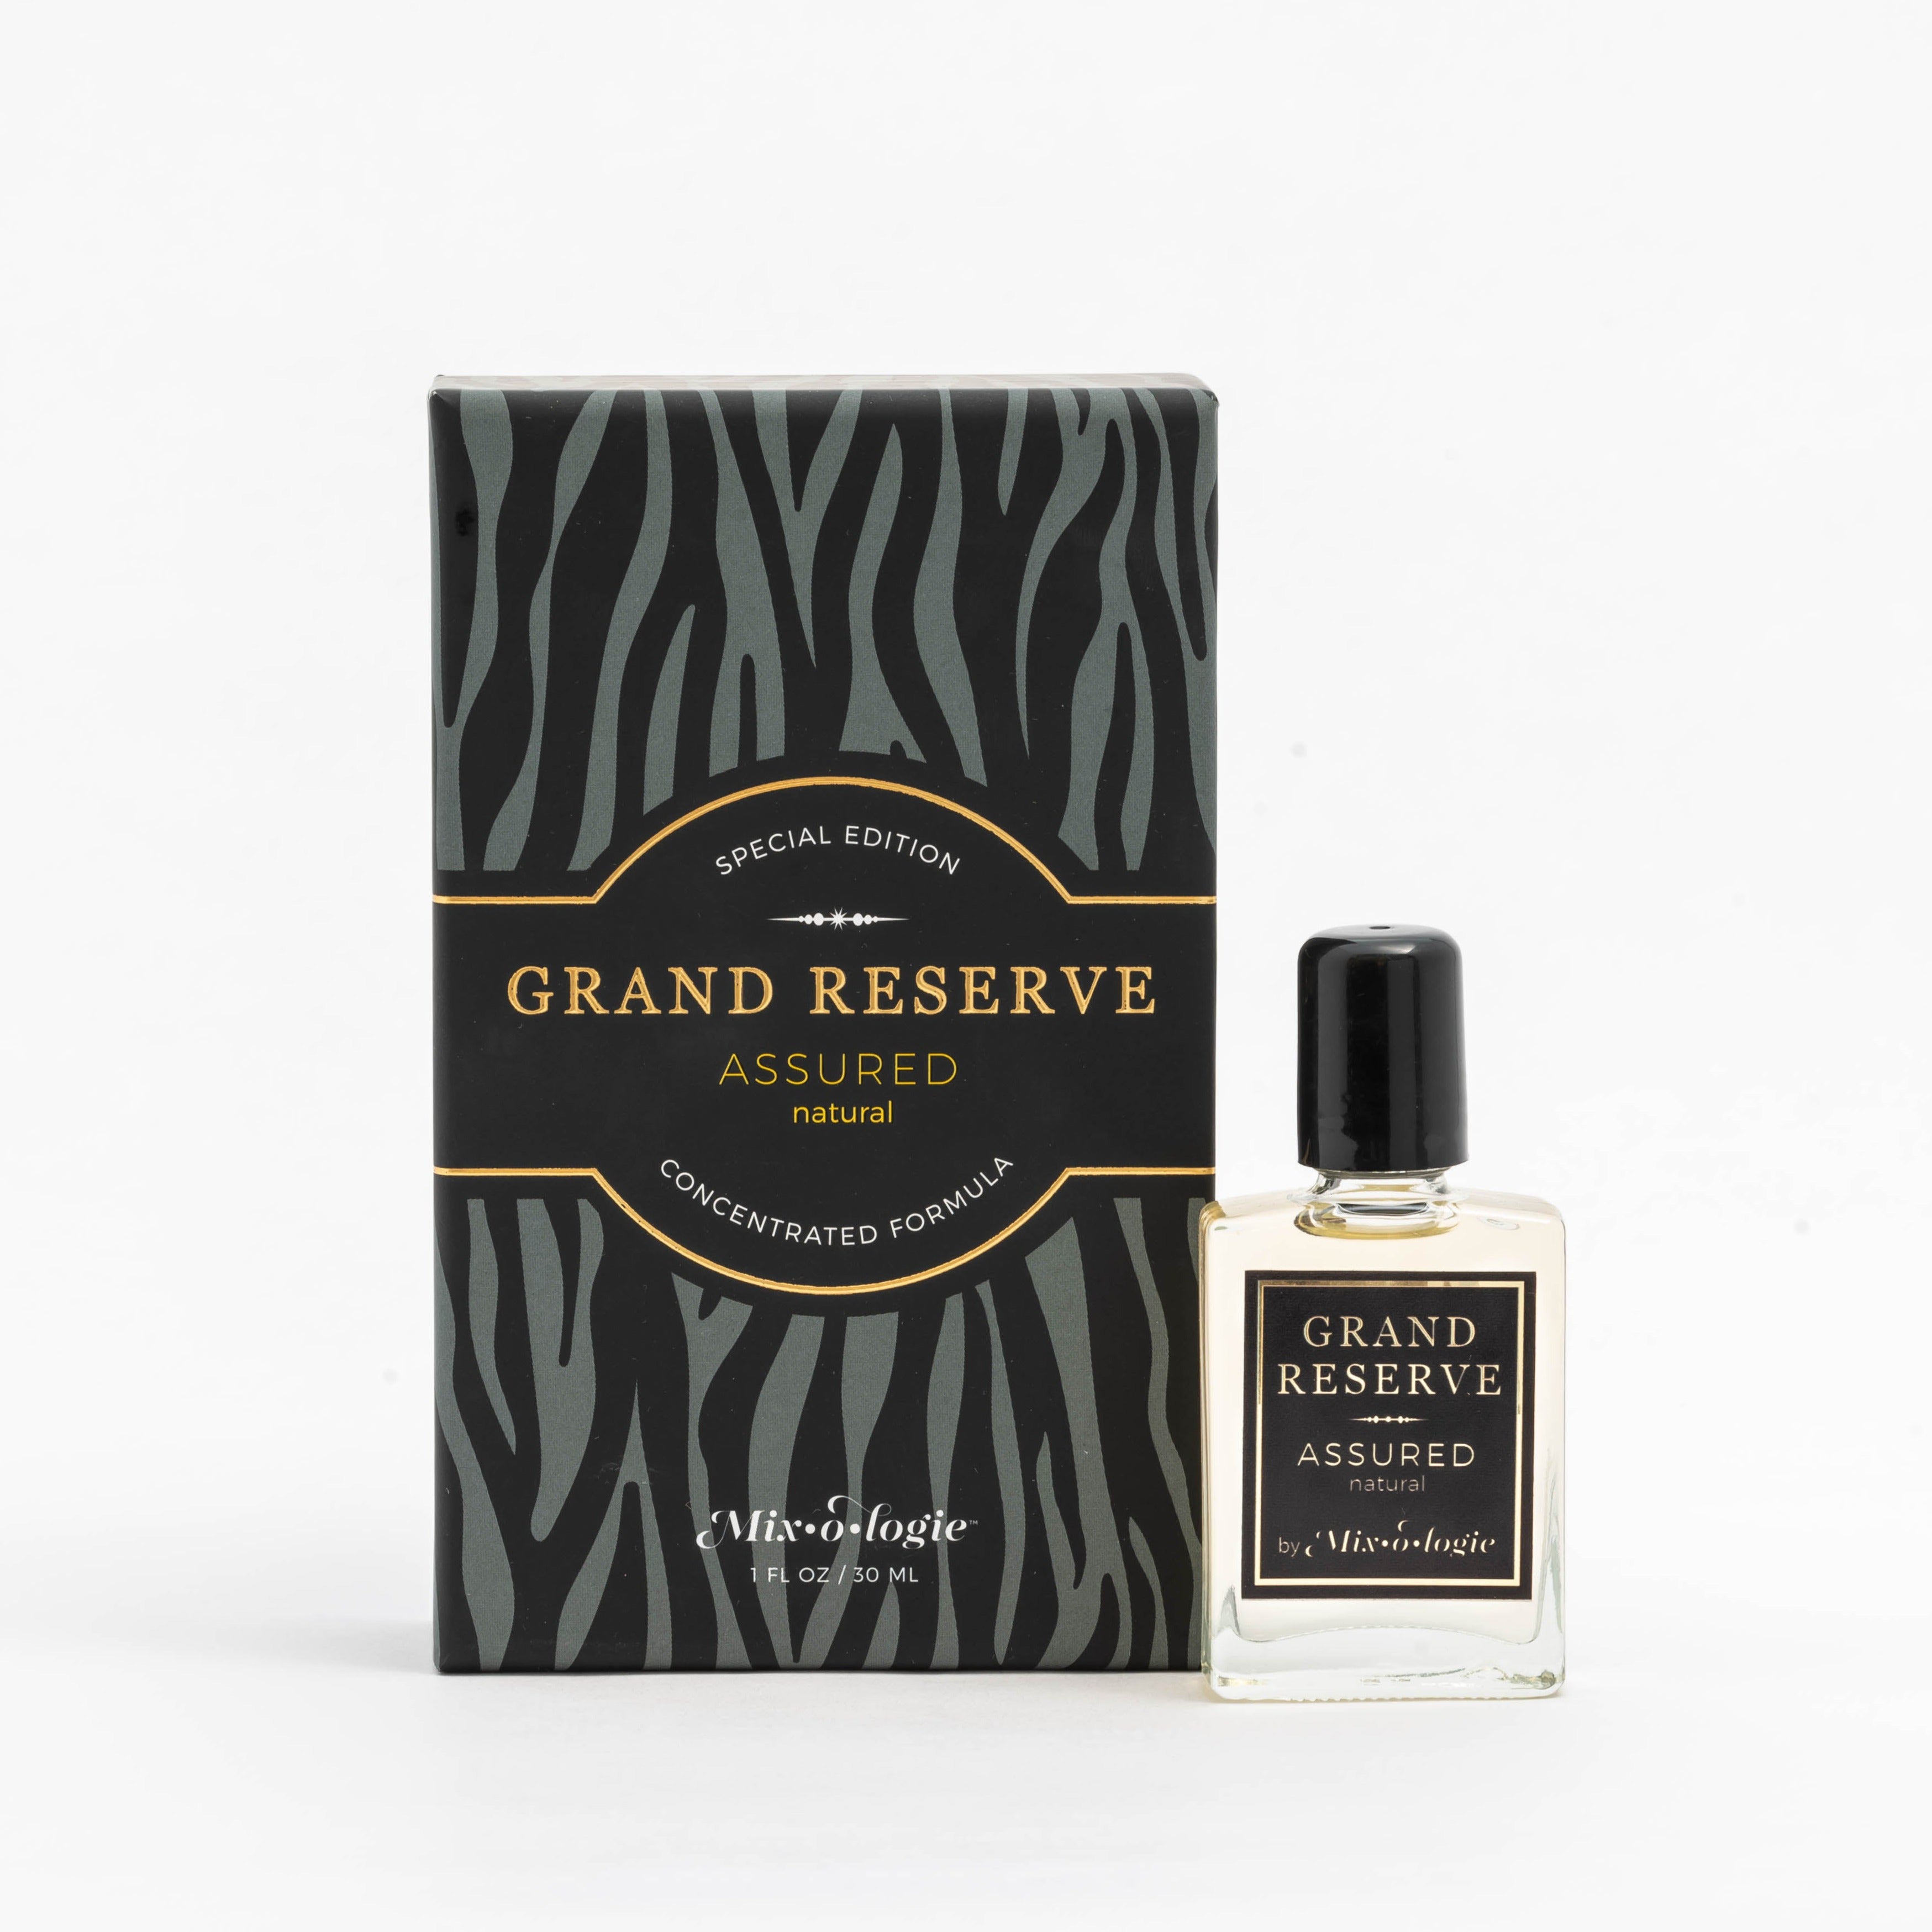 Assured (Natural) Special Edition Grand Reserve concentrated formula in clear glass rectangle perfume bottle that has 1 fl oz or 30 mL of light-yellow liquid with black cap, label, and spray nozzle. Black zebra pattern rectangle box with mustard letting. Grand Reserve and box pictured with white background.